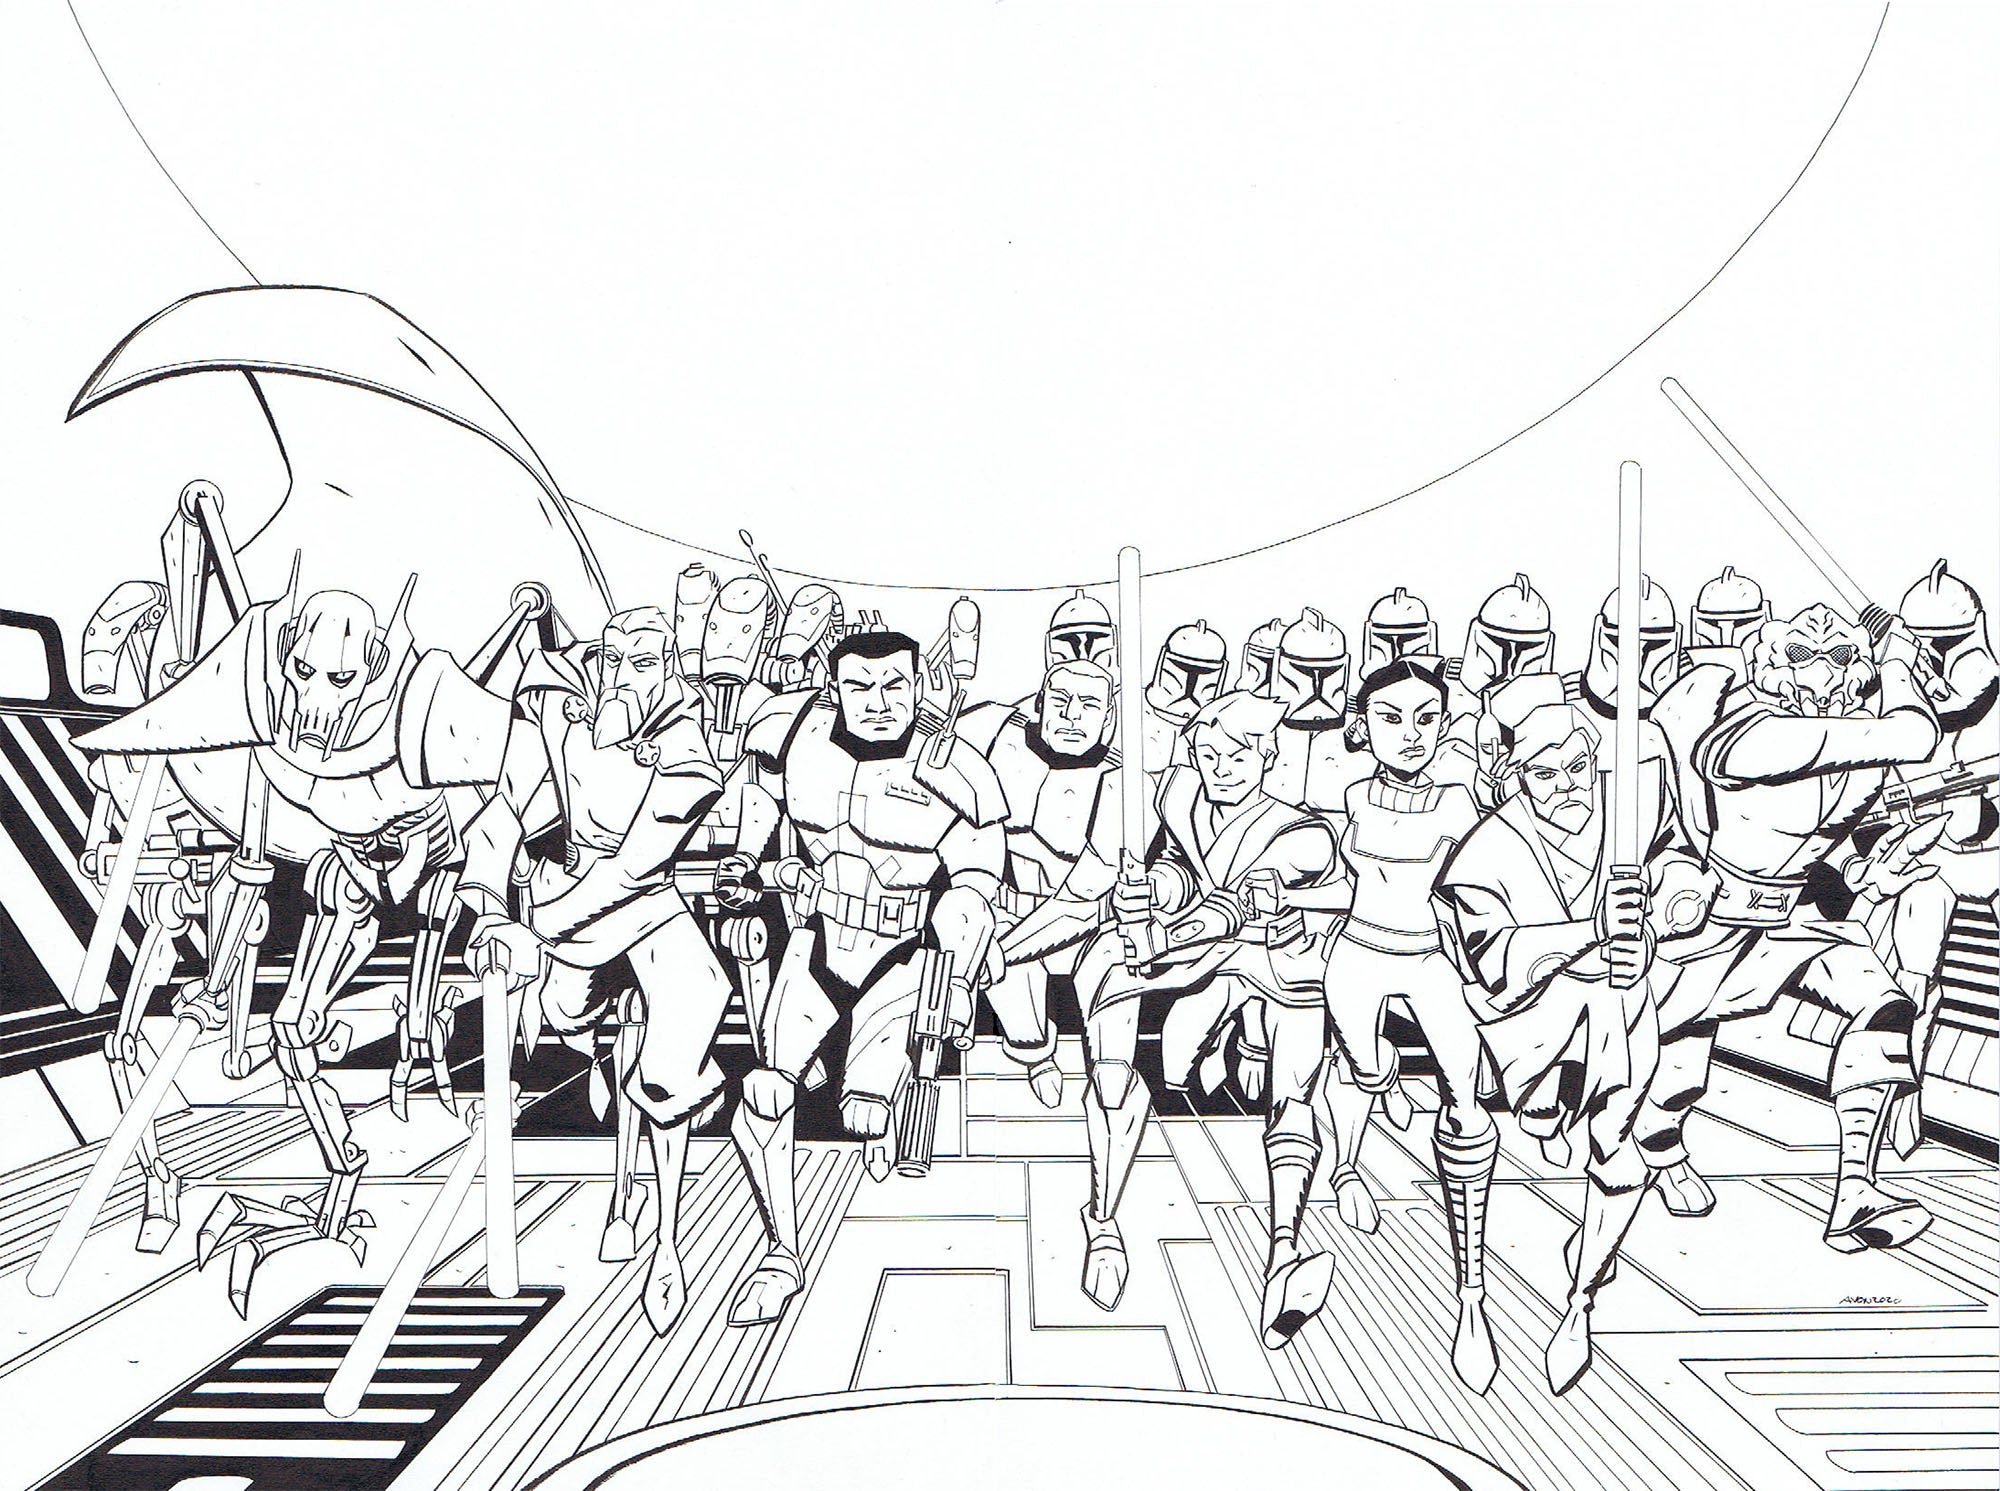 STAR WARS ADVENTURES: CLONE WARS #1 WRAP COVER + LAYOUT